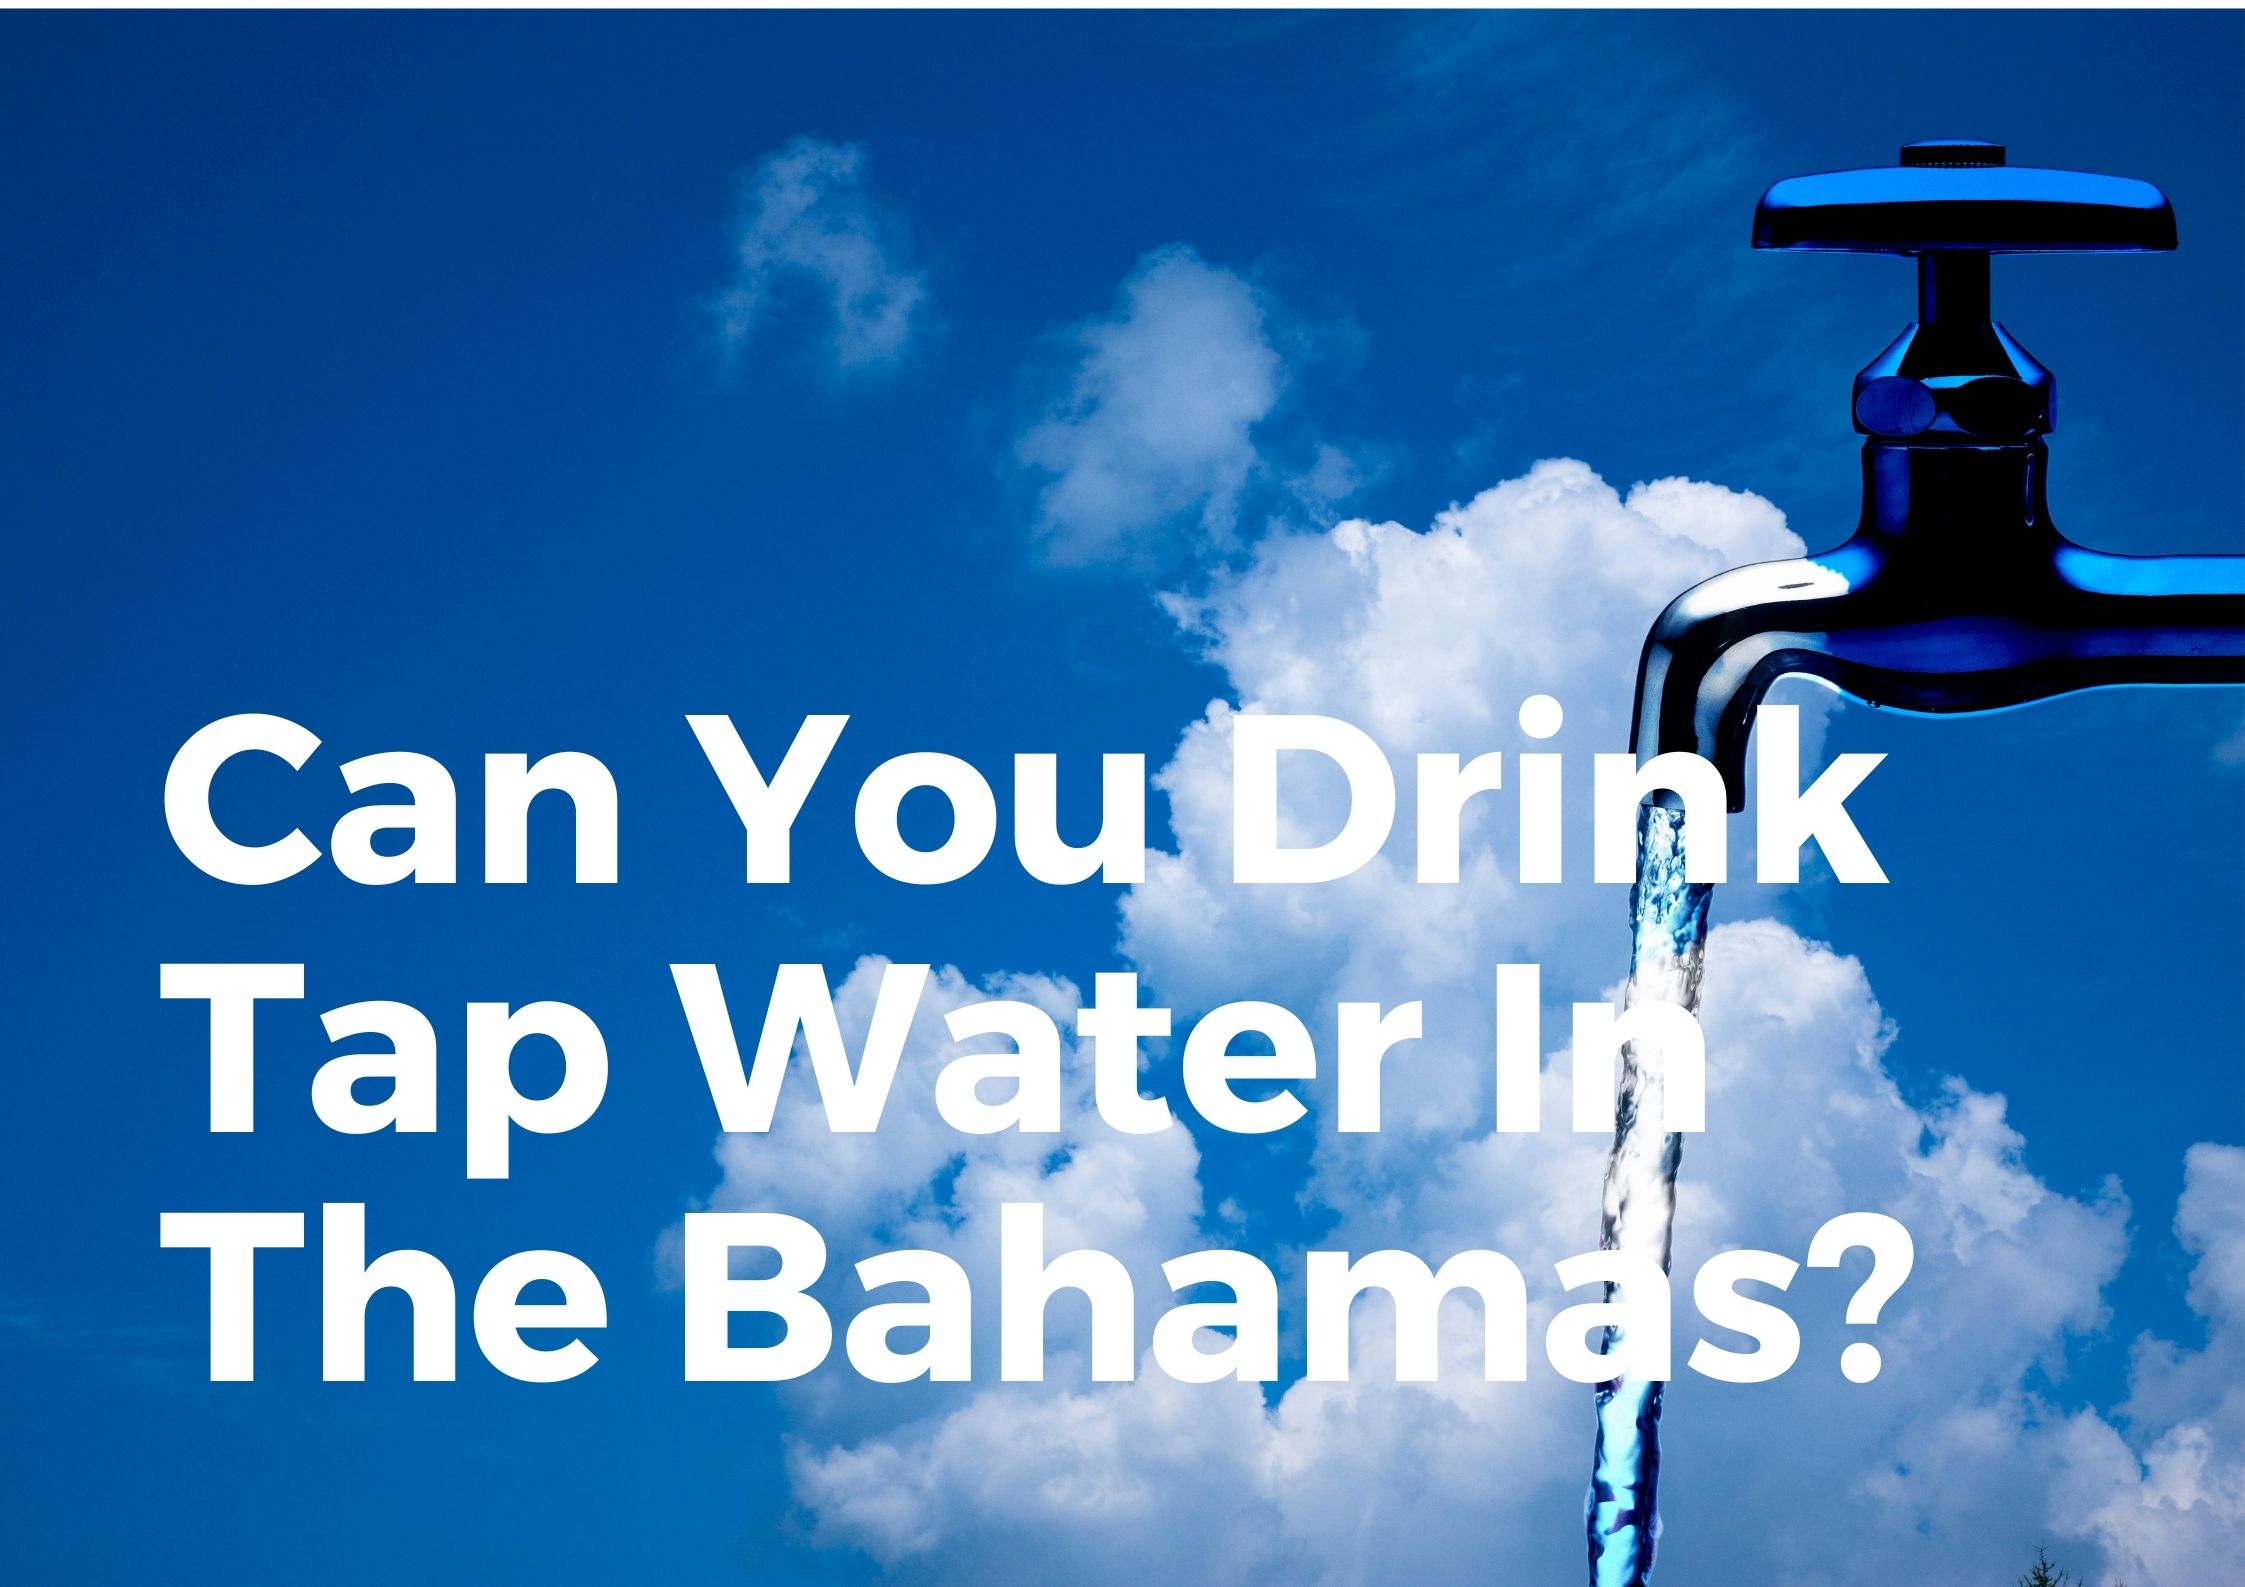 Can you drink tap water in the bahamas?